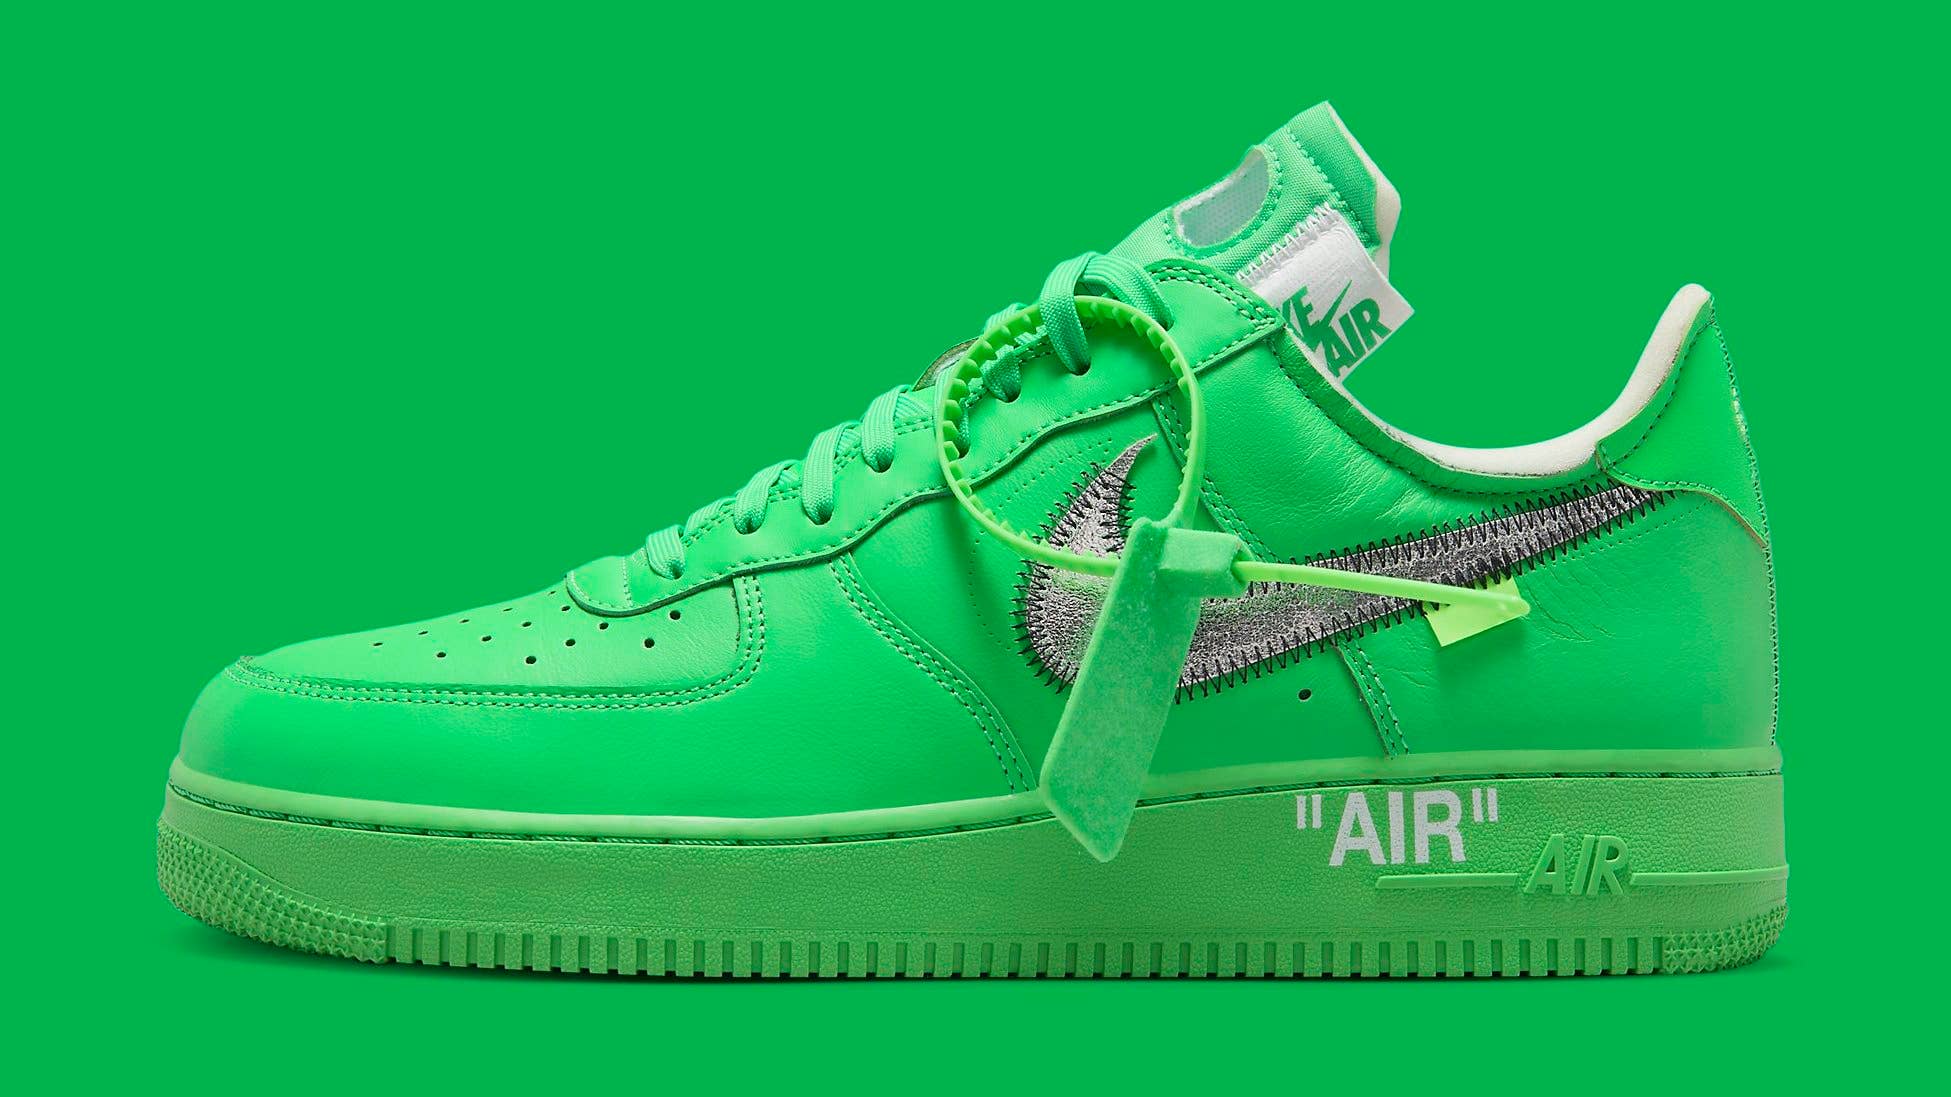 Off-White x Nike Air Force 1 Low 'Brooklyn' DX1419 300 Lateral